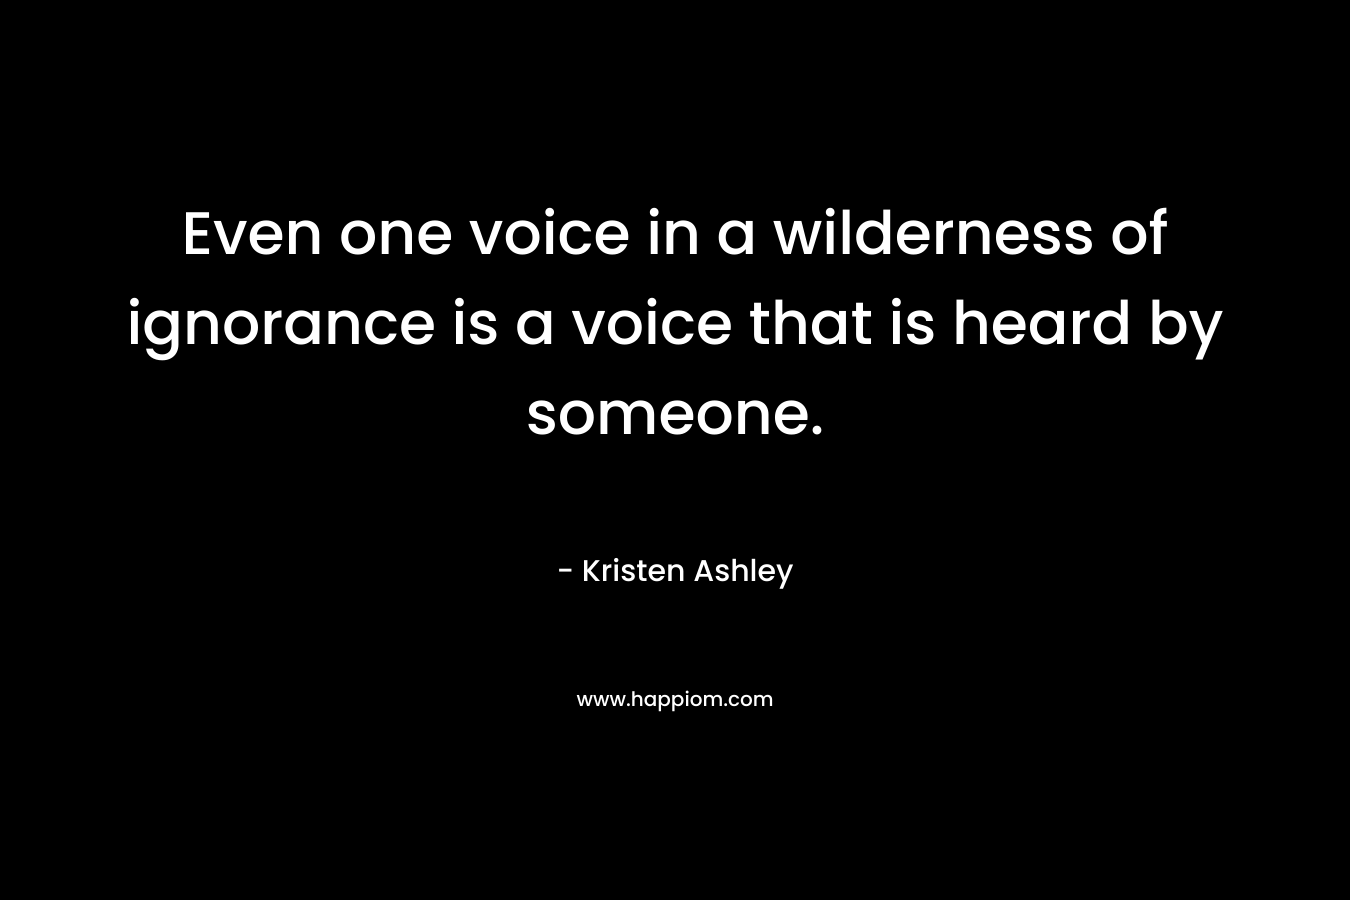 Even one voice in a wilderness of ignorance is a voice that is heard by someone.